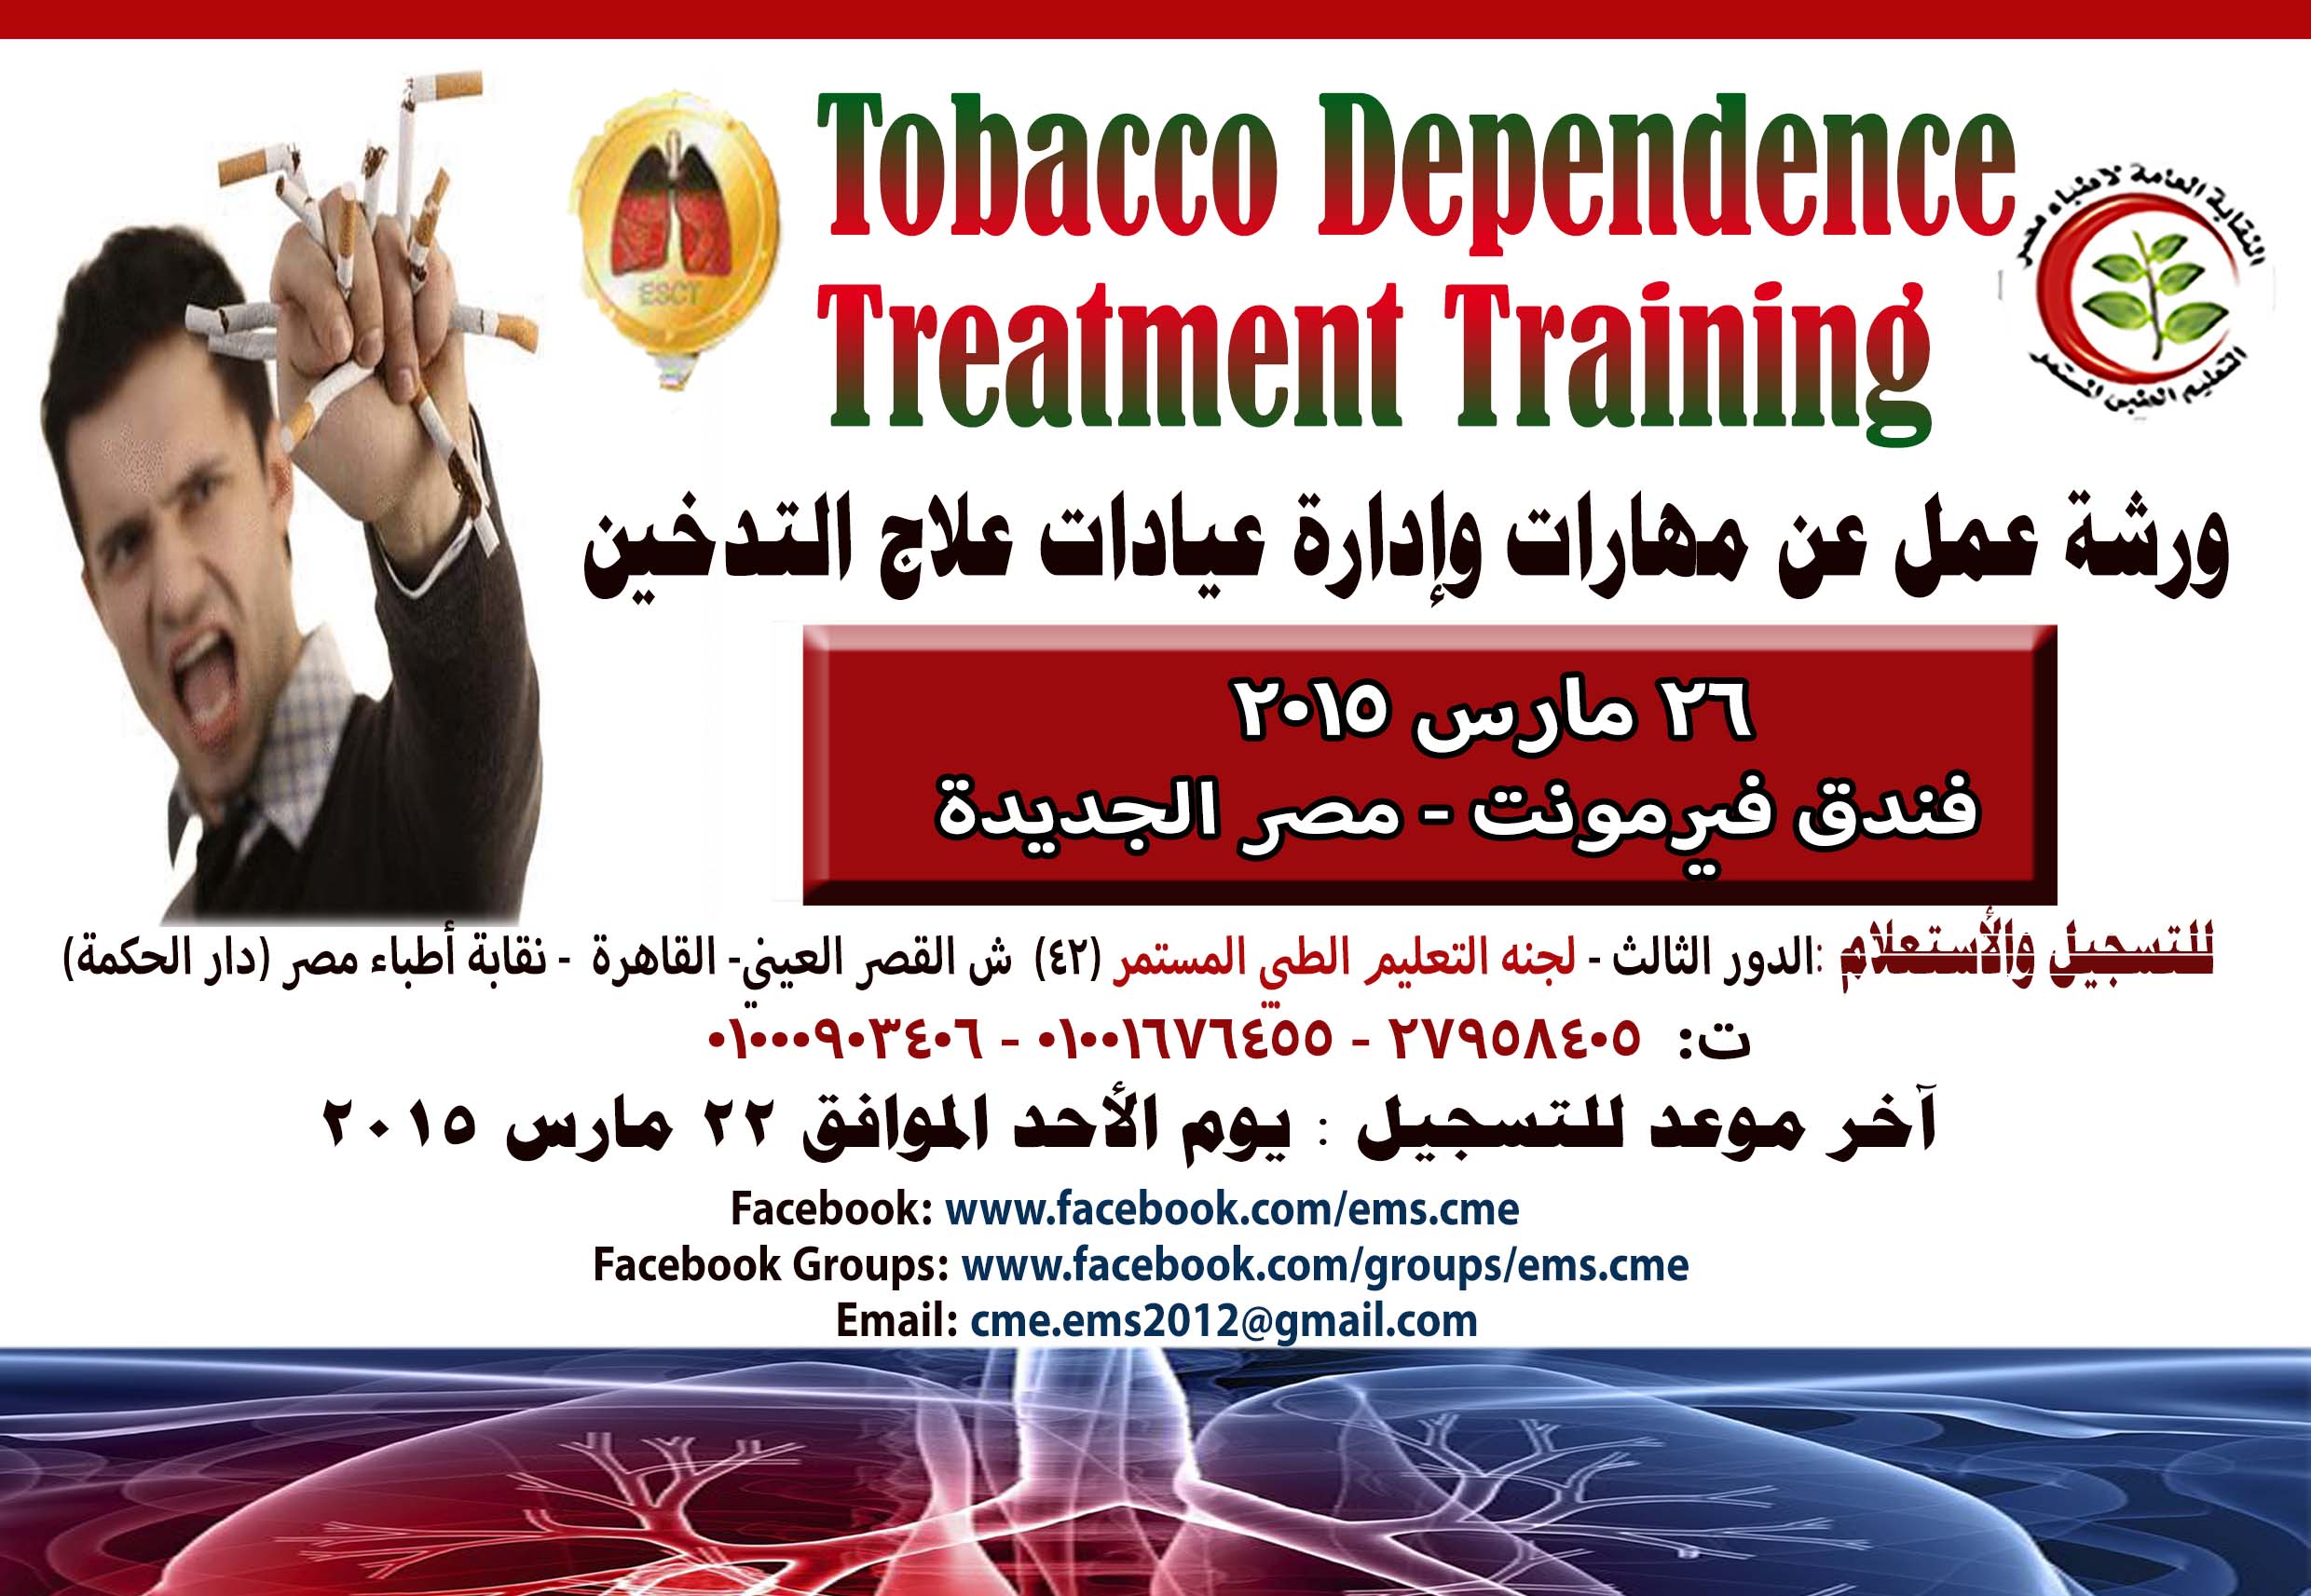 Tobacco Dependence Treatment training